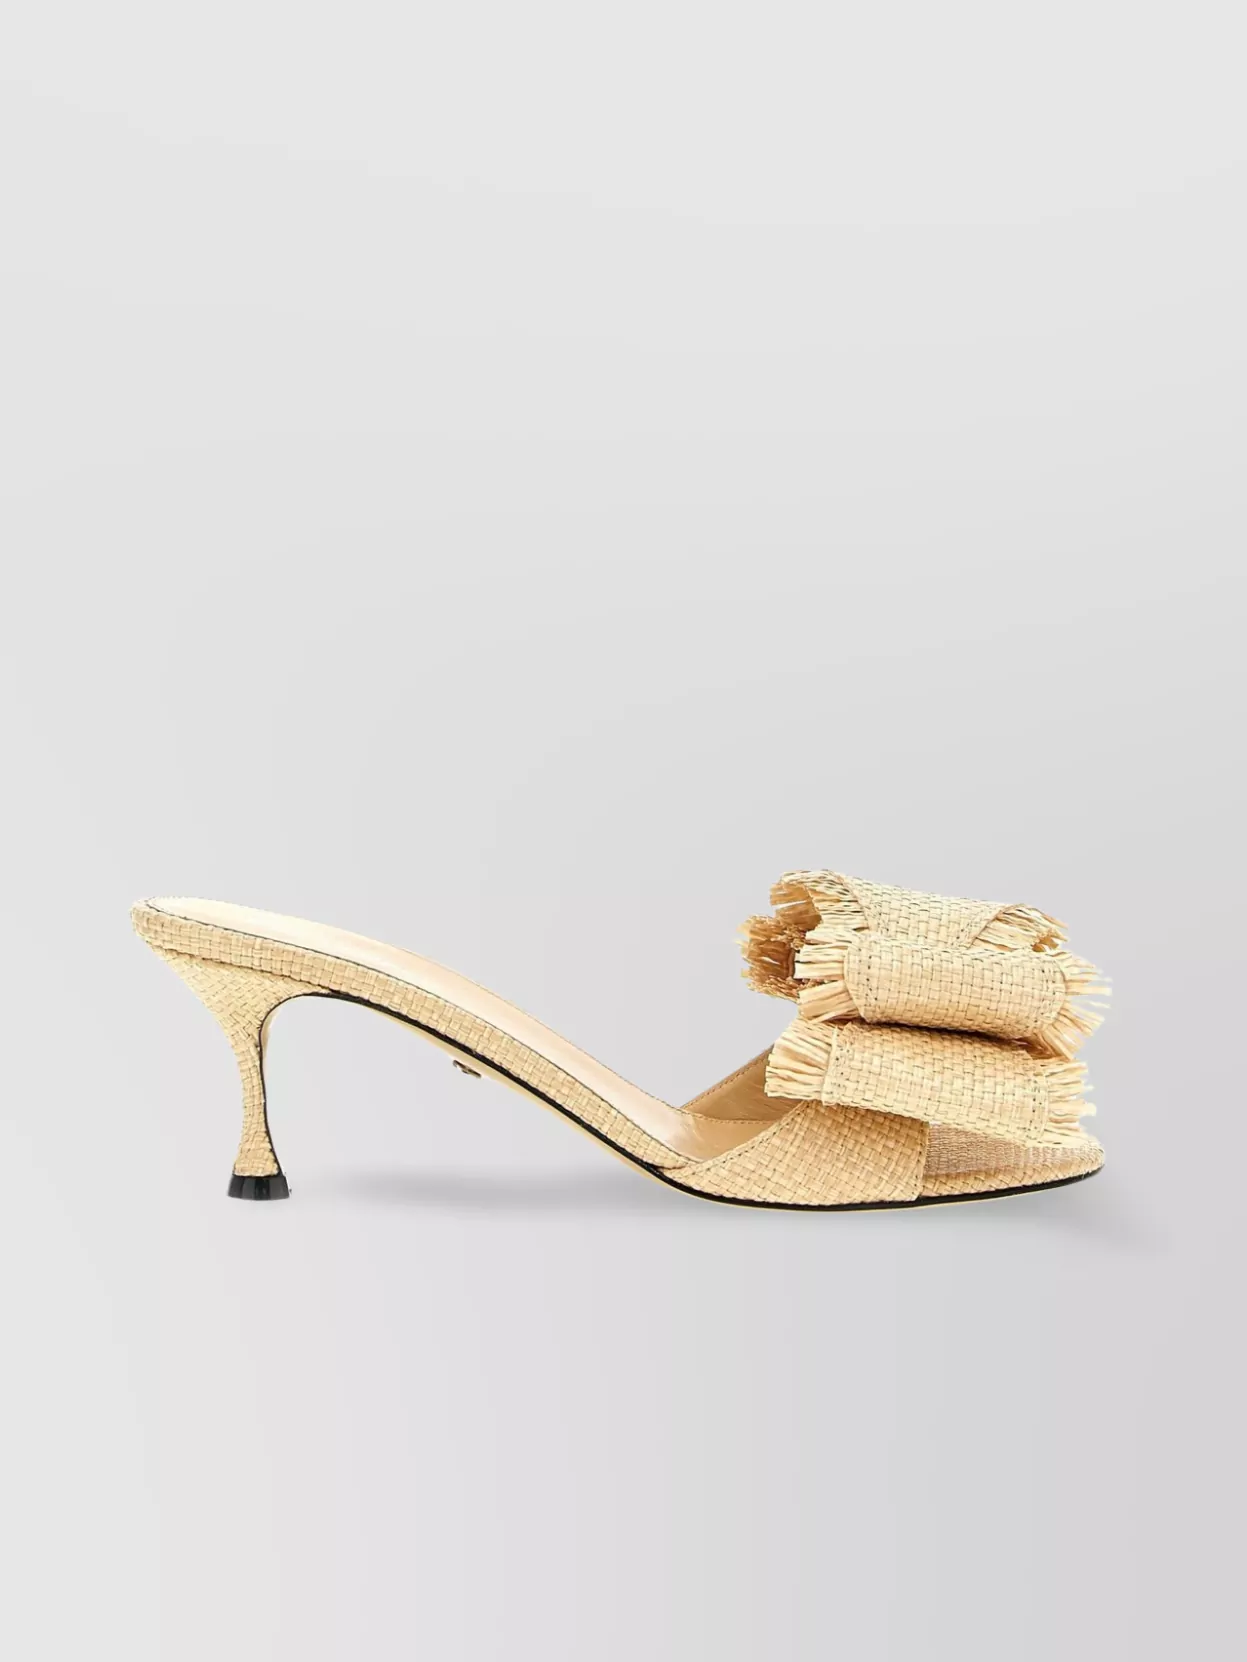 Mach & Mach 'gifted Bow' Fringed Sandals In Gold